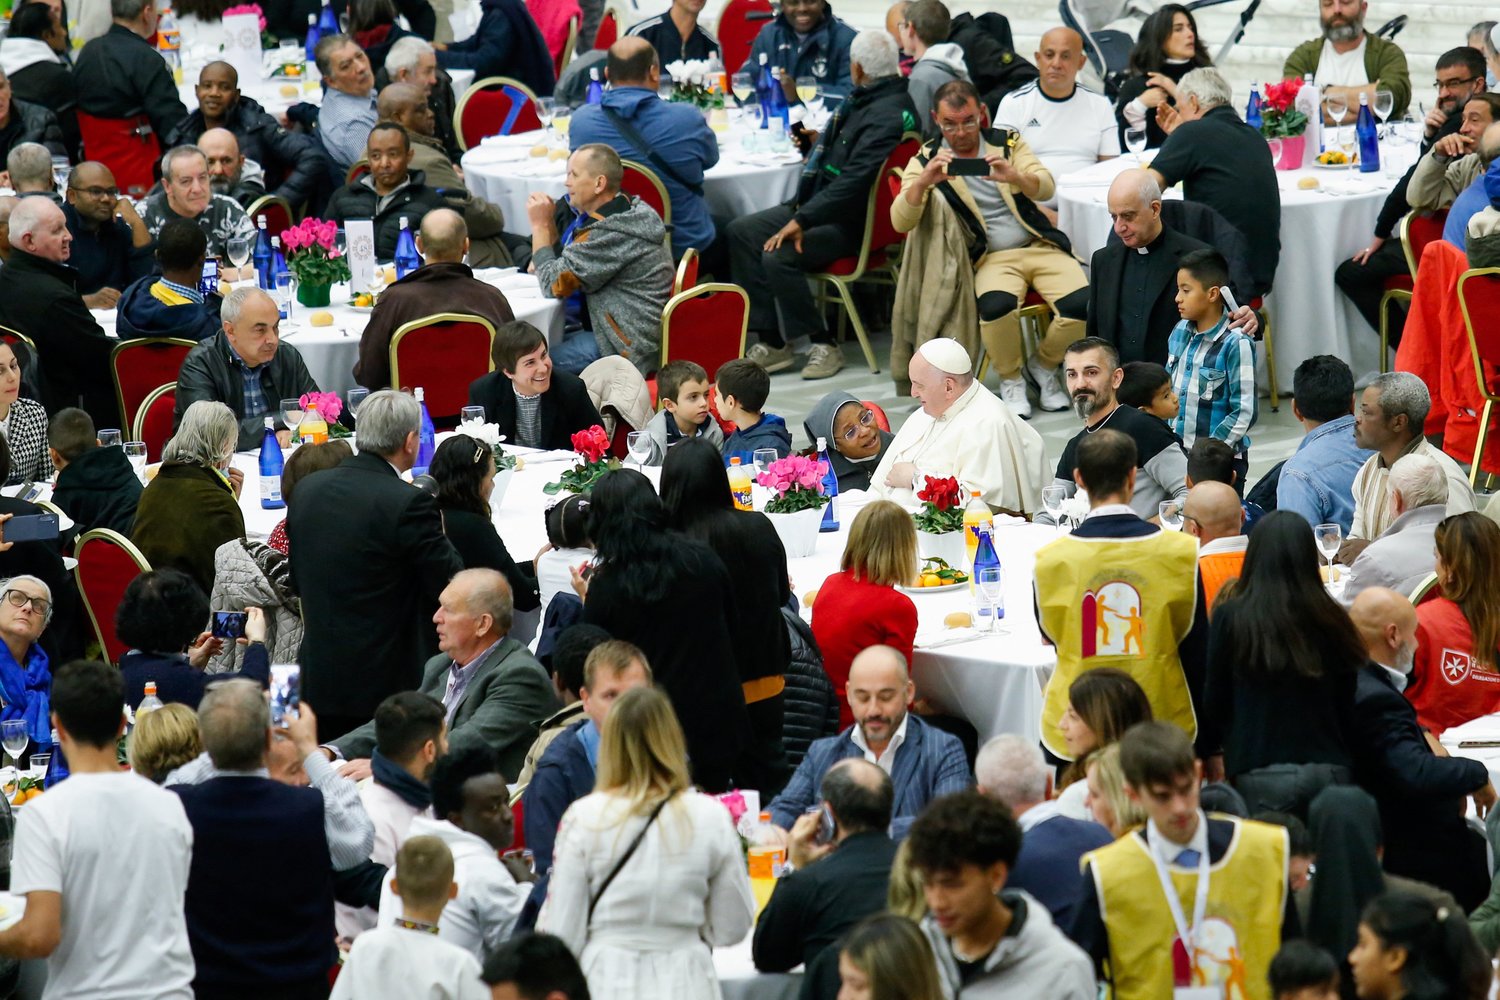 Pope Francis joins some 1,300 guests for lunch in the Vatican audience hall on the World Day of the Poor Nov. 13.